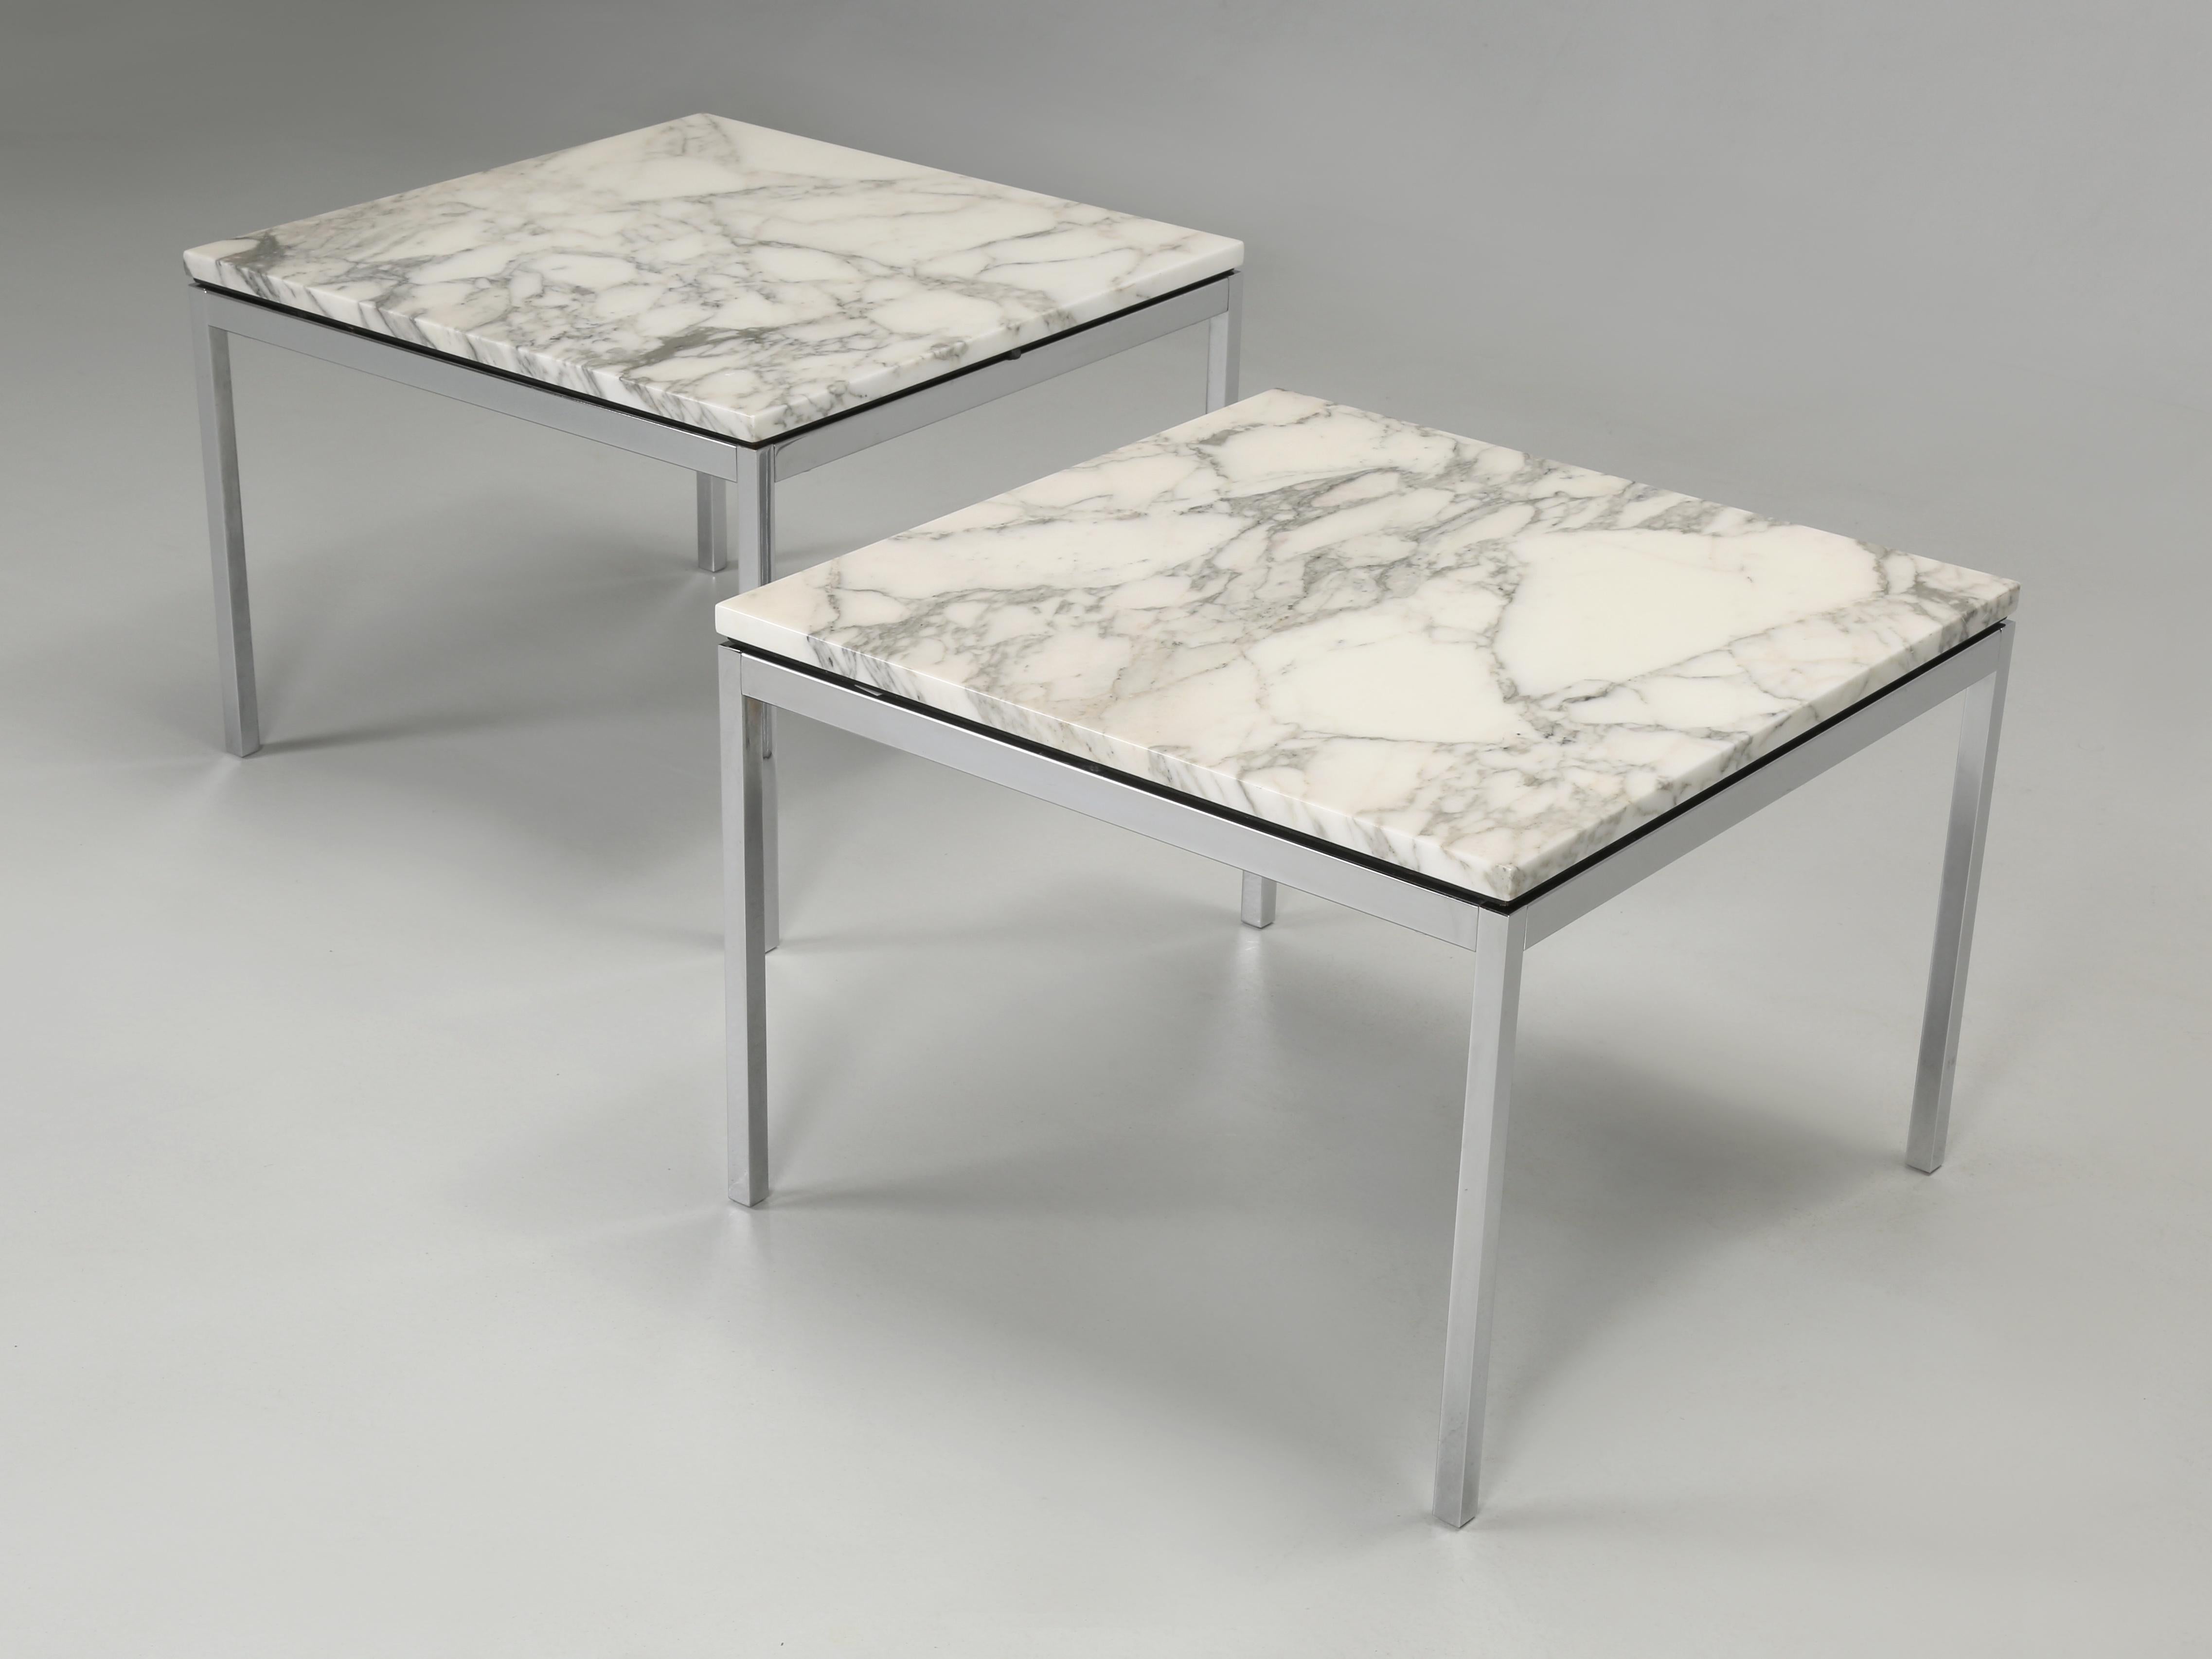 Pair of matching Arabescato marble and steel side tables or coffee tables by Florence Knoll, who was an American architect, interior designer and furniture designer. Knoll is credited with bringing modern aesthetics to the office. Florence was born